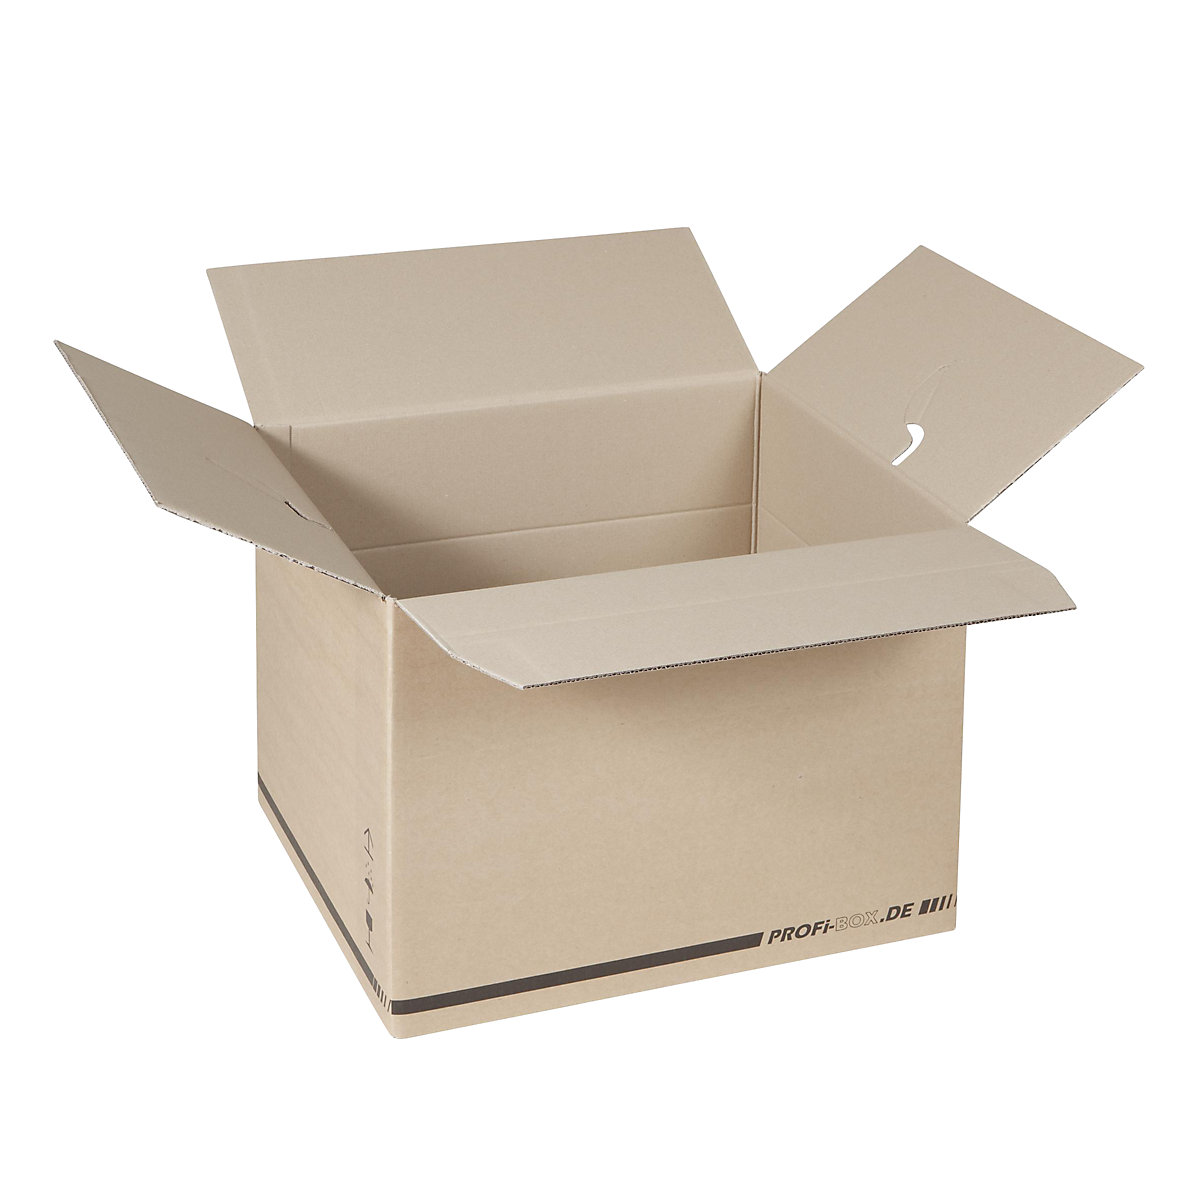 Professional boxes, made of double fluted cardboard, internal dimensions 476 x 376 x 340 mm, FEFCO 0216, pack of 50-1